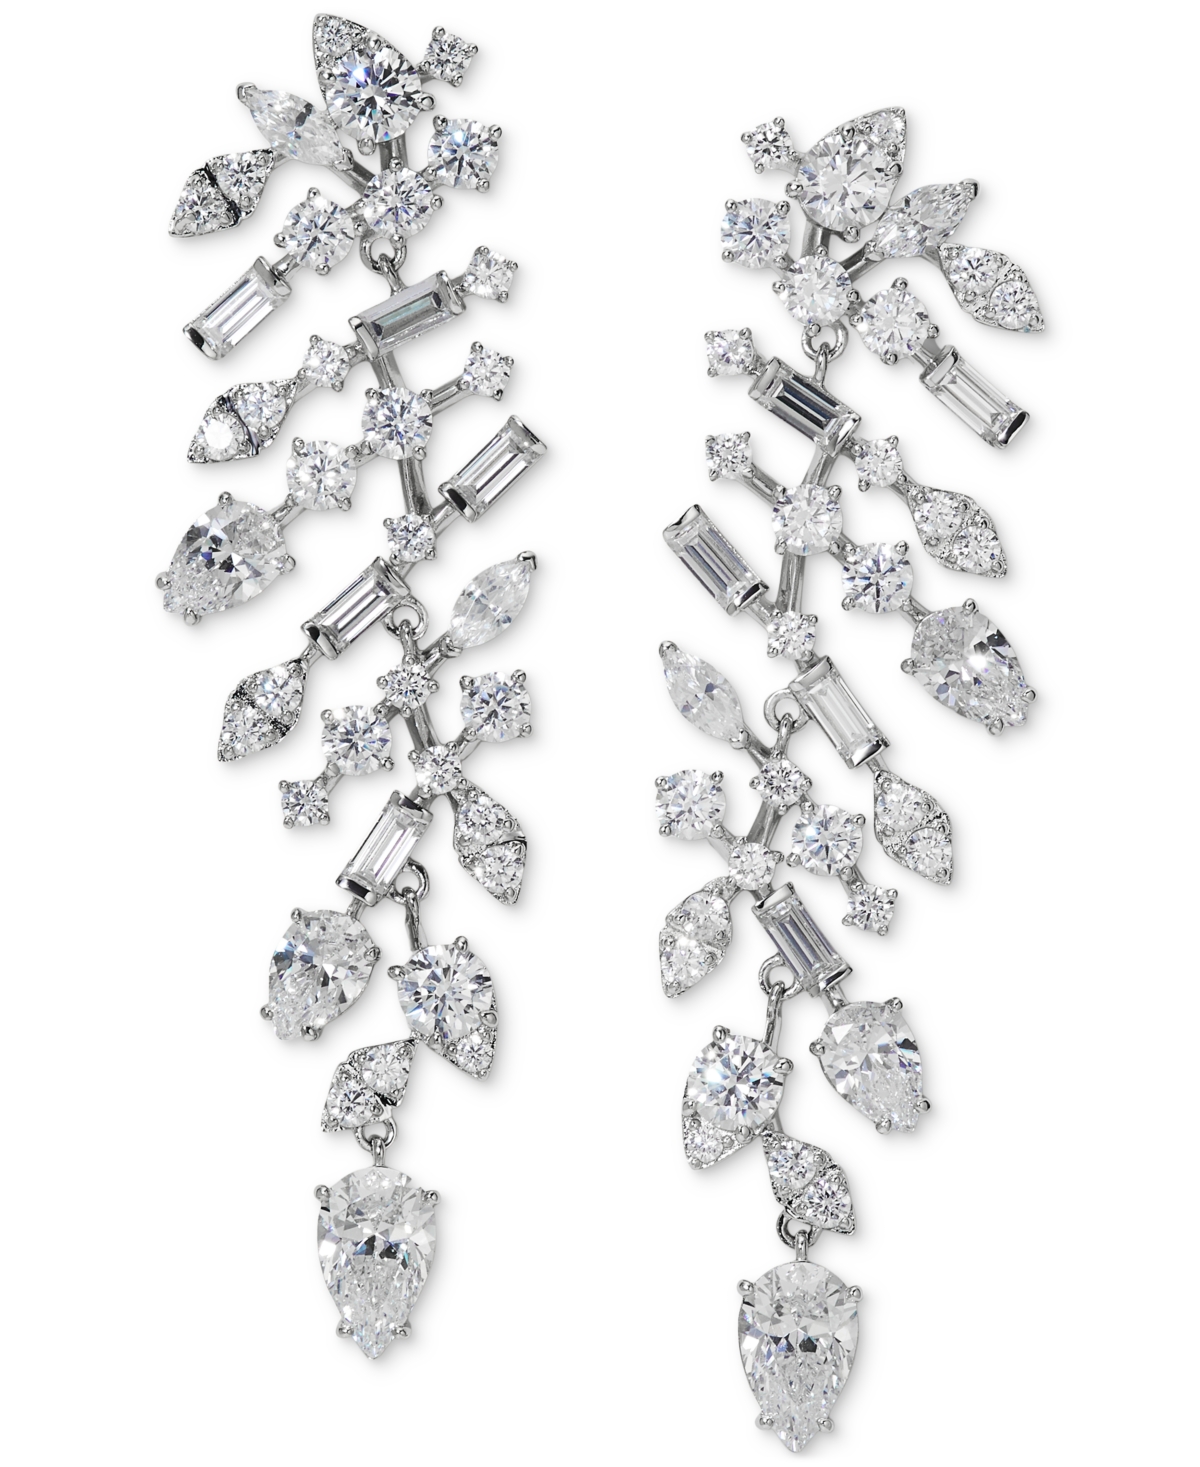 Silver-Tone Mixed Cubic Zirconia Cluster Chandelier Earrings, Created for Macy's - Rhodium